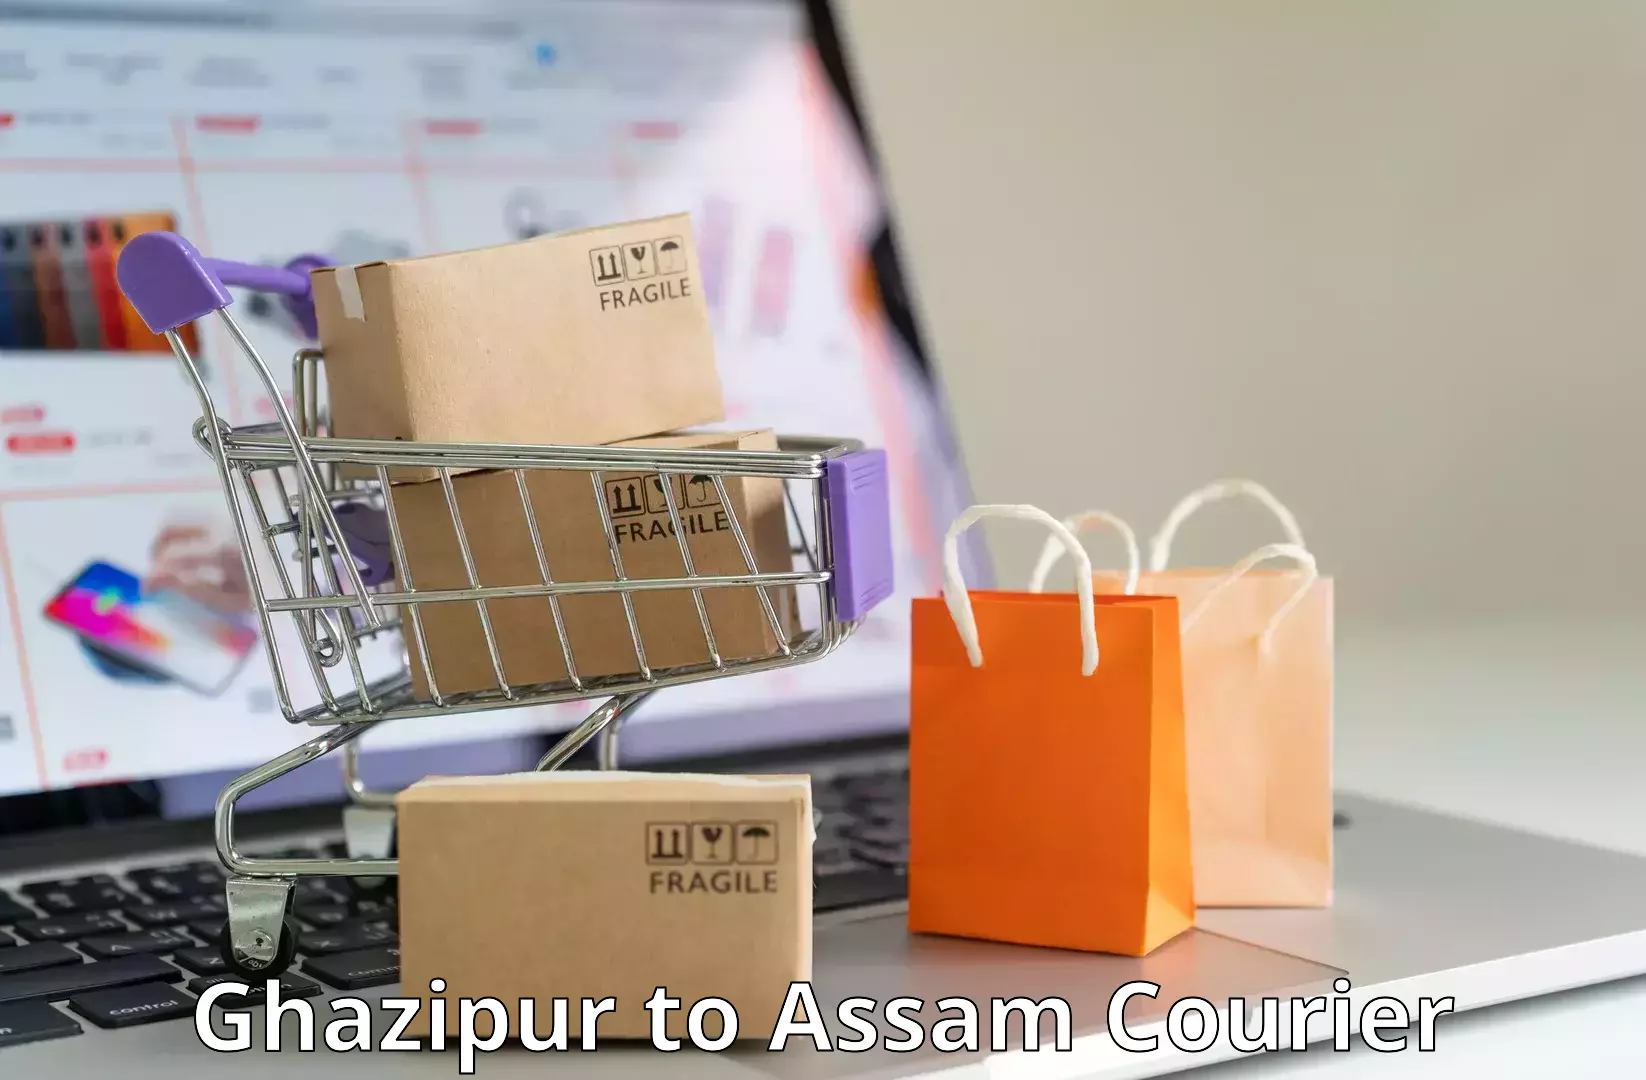 24/7 courier service Ghazipur to Mirza Kamrup